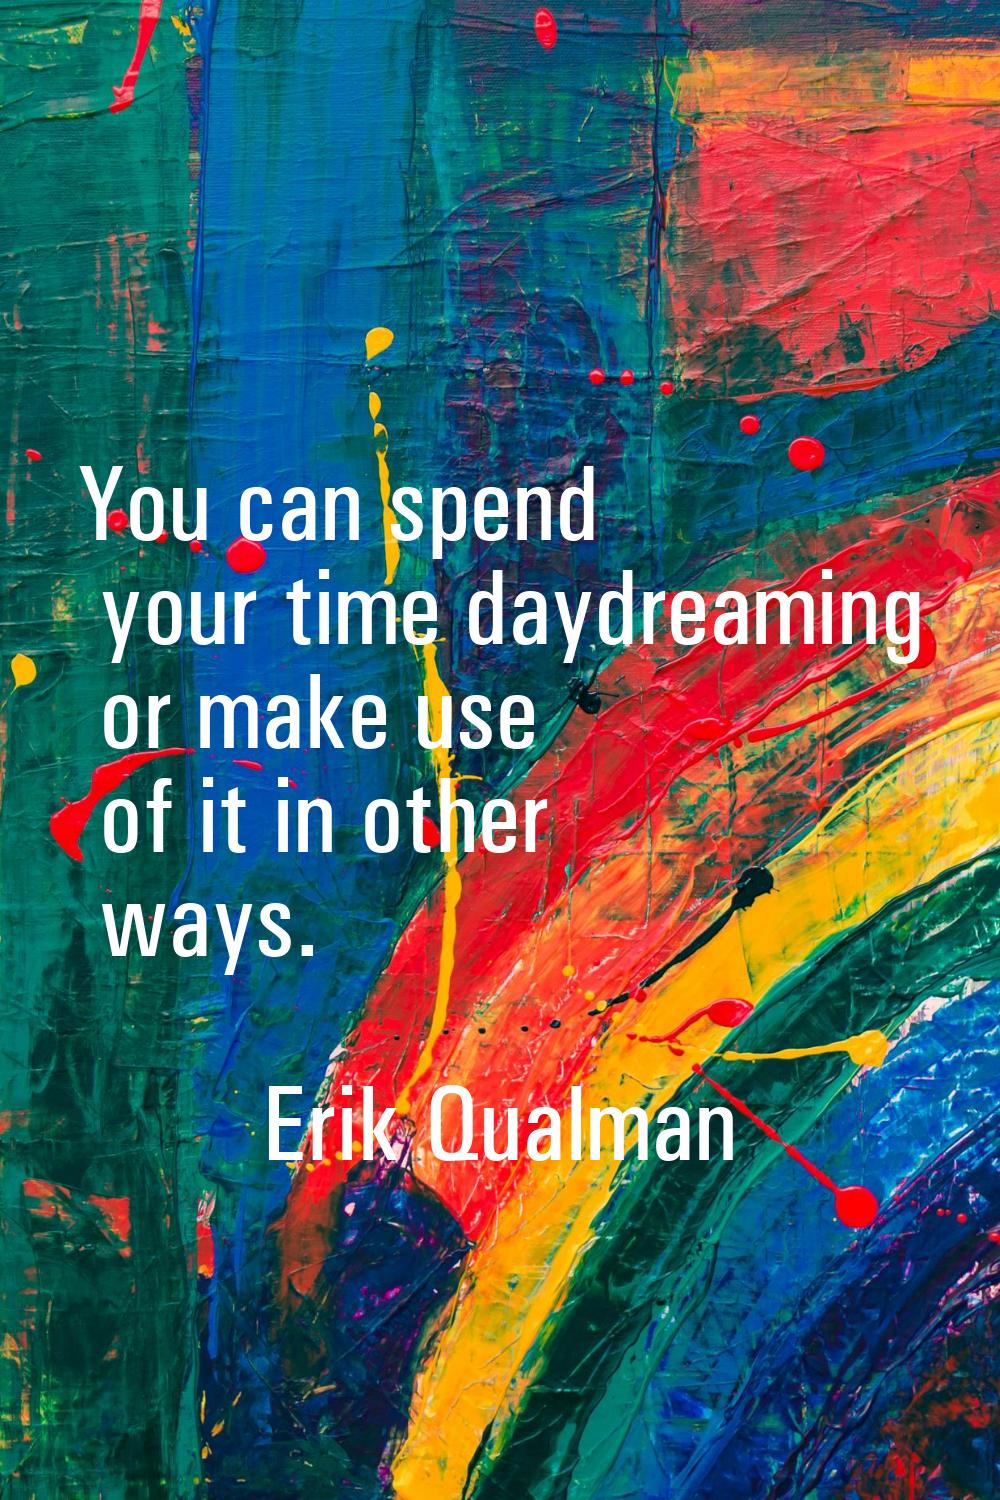 You can spend your time daydreaming or make use of it in other ways.